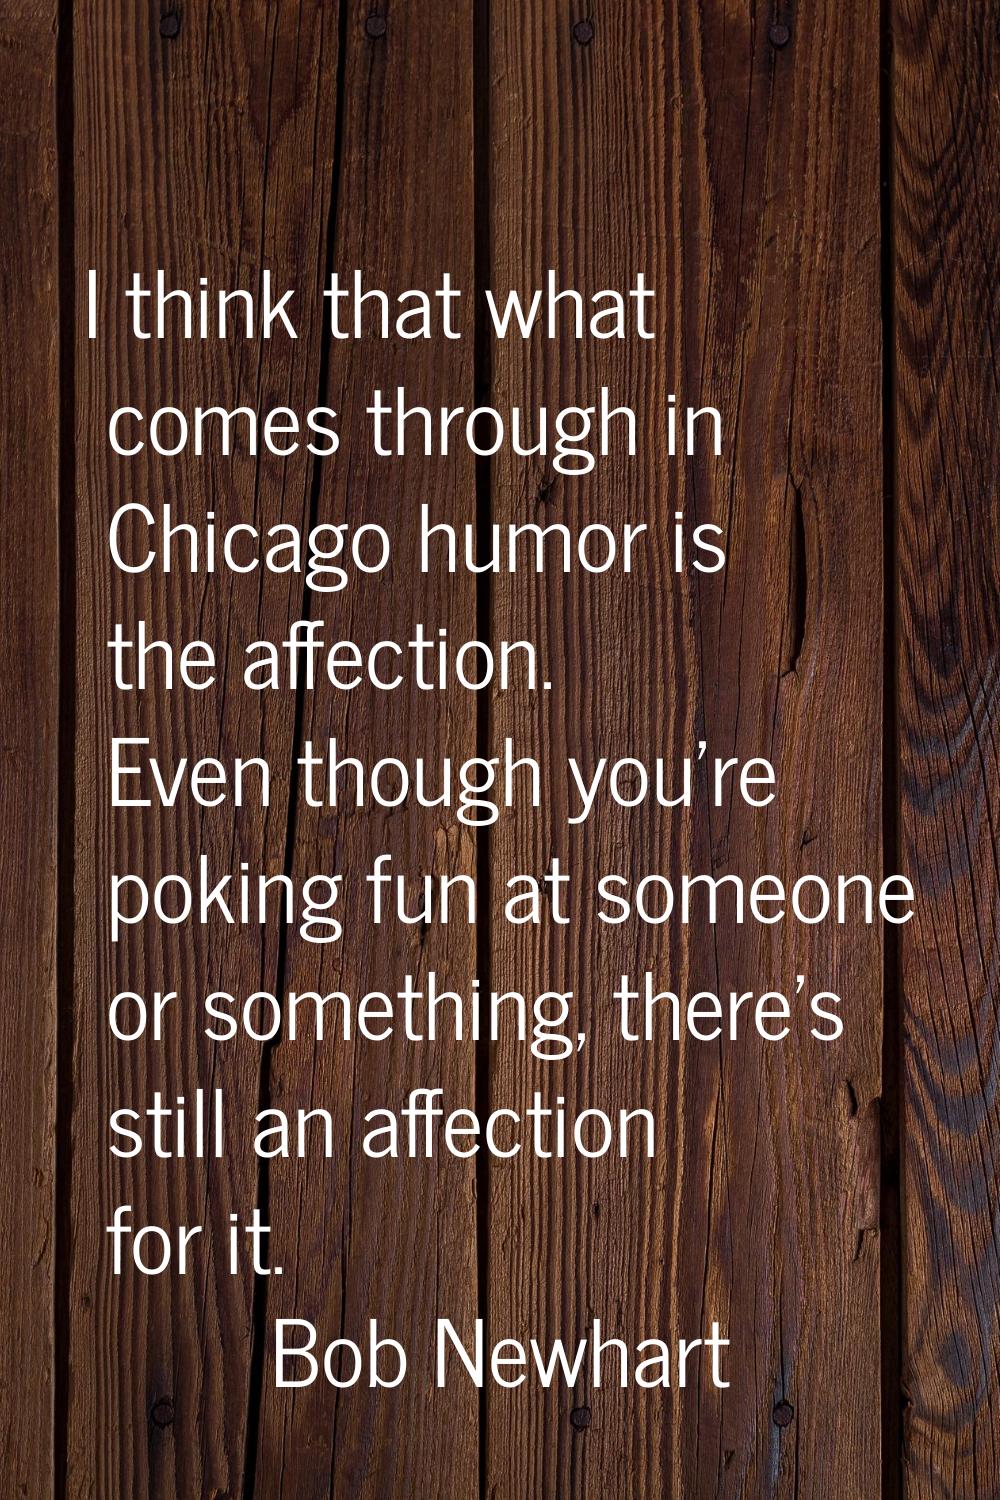 I think that what comes through in Chicago humor is the affection. Even though you're poking fun at